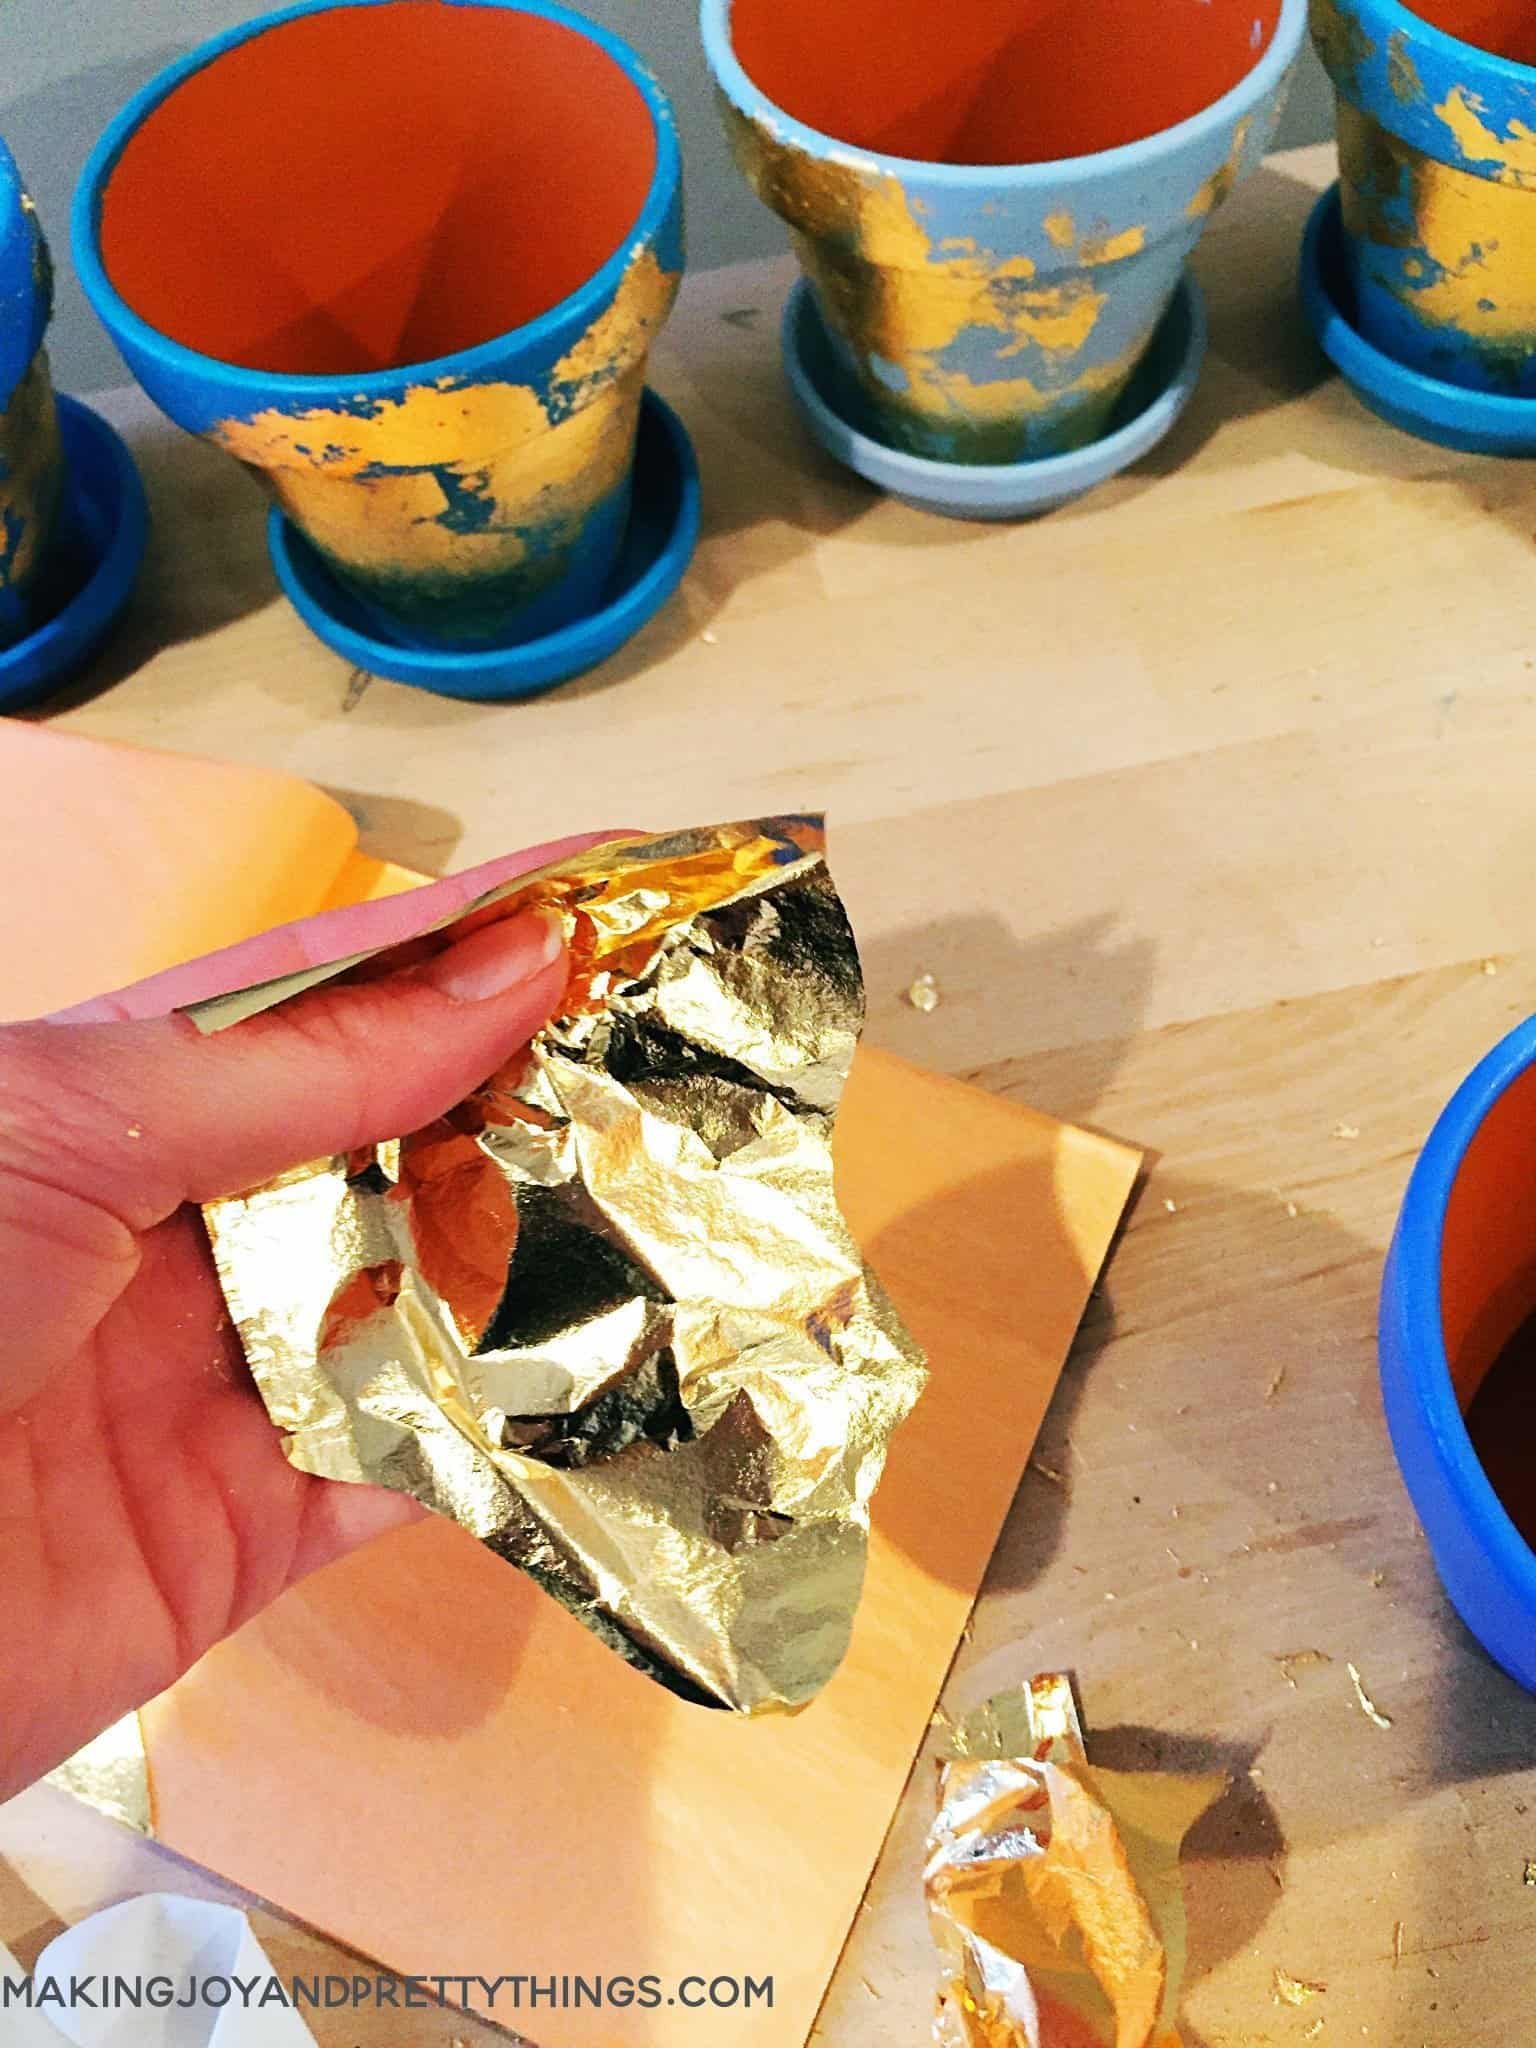 Spray the pots and gold foil in order to apply the leaf look to the planters transformed from terra cotta pots